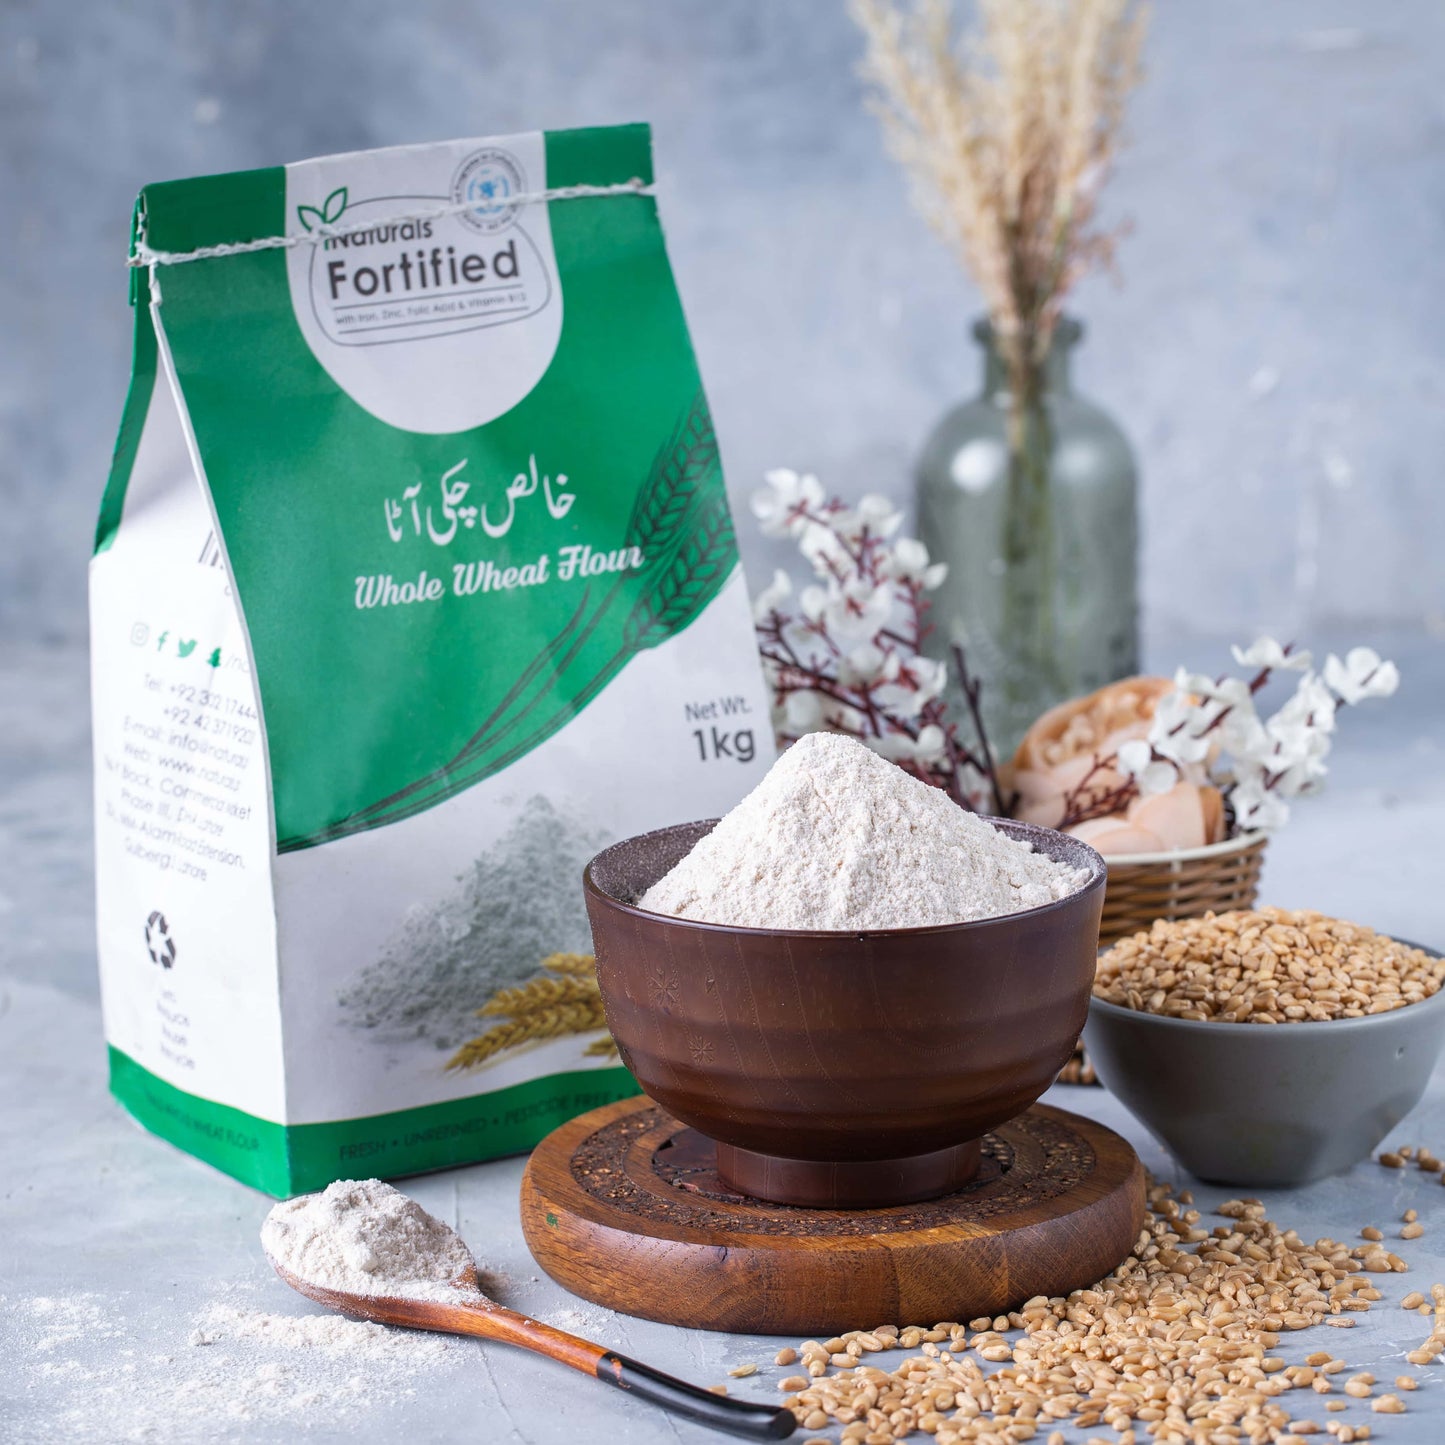 Fortified Whole Wheat Flour